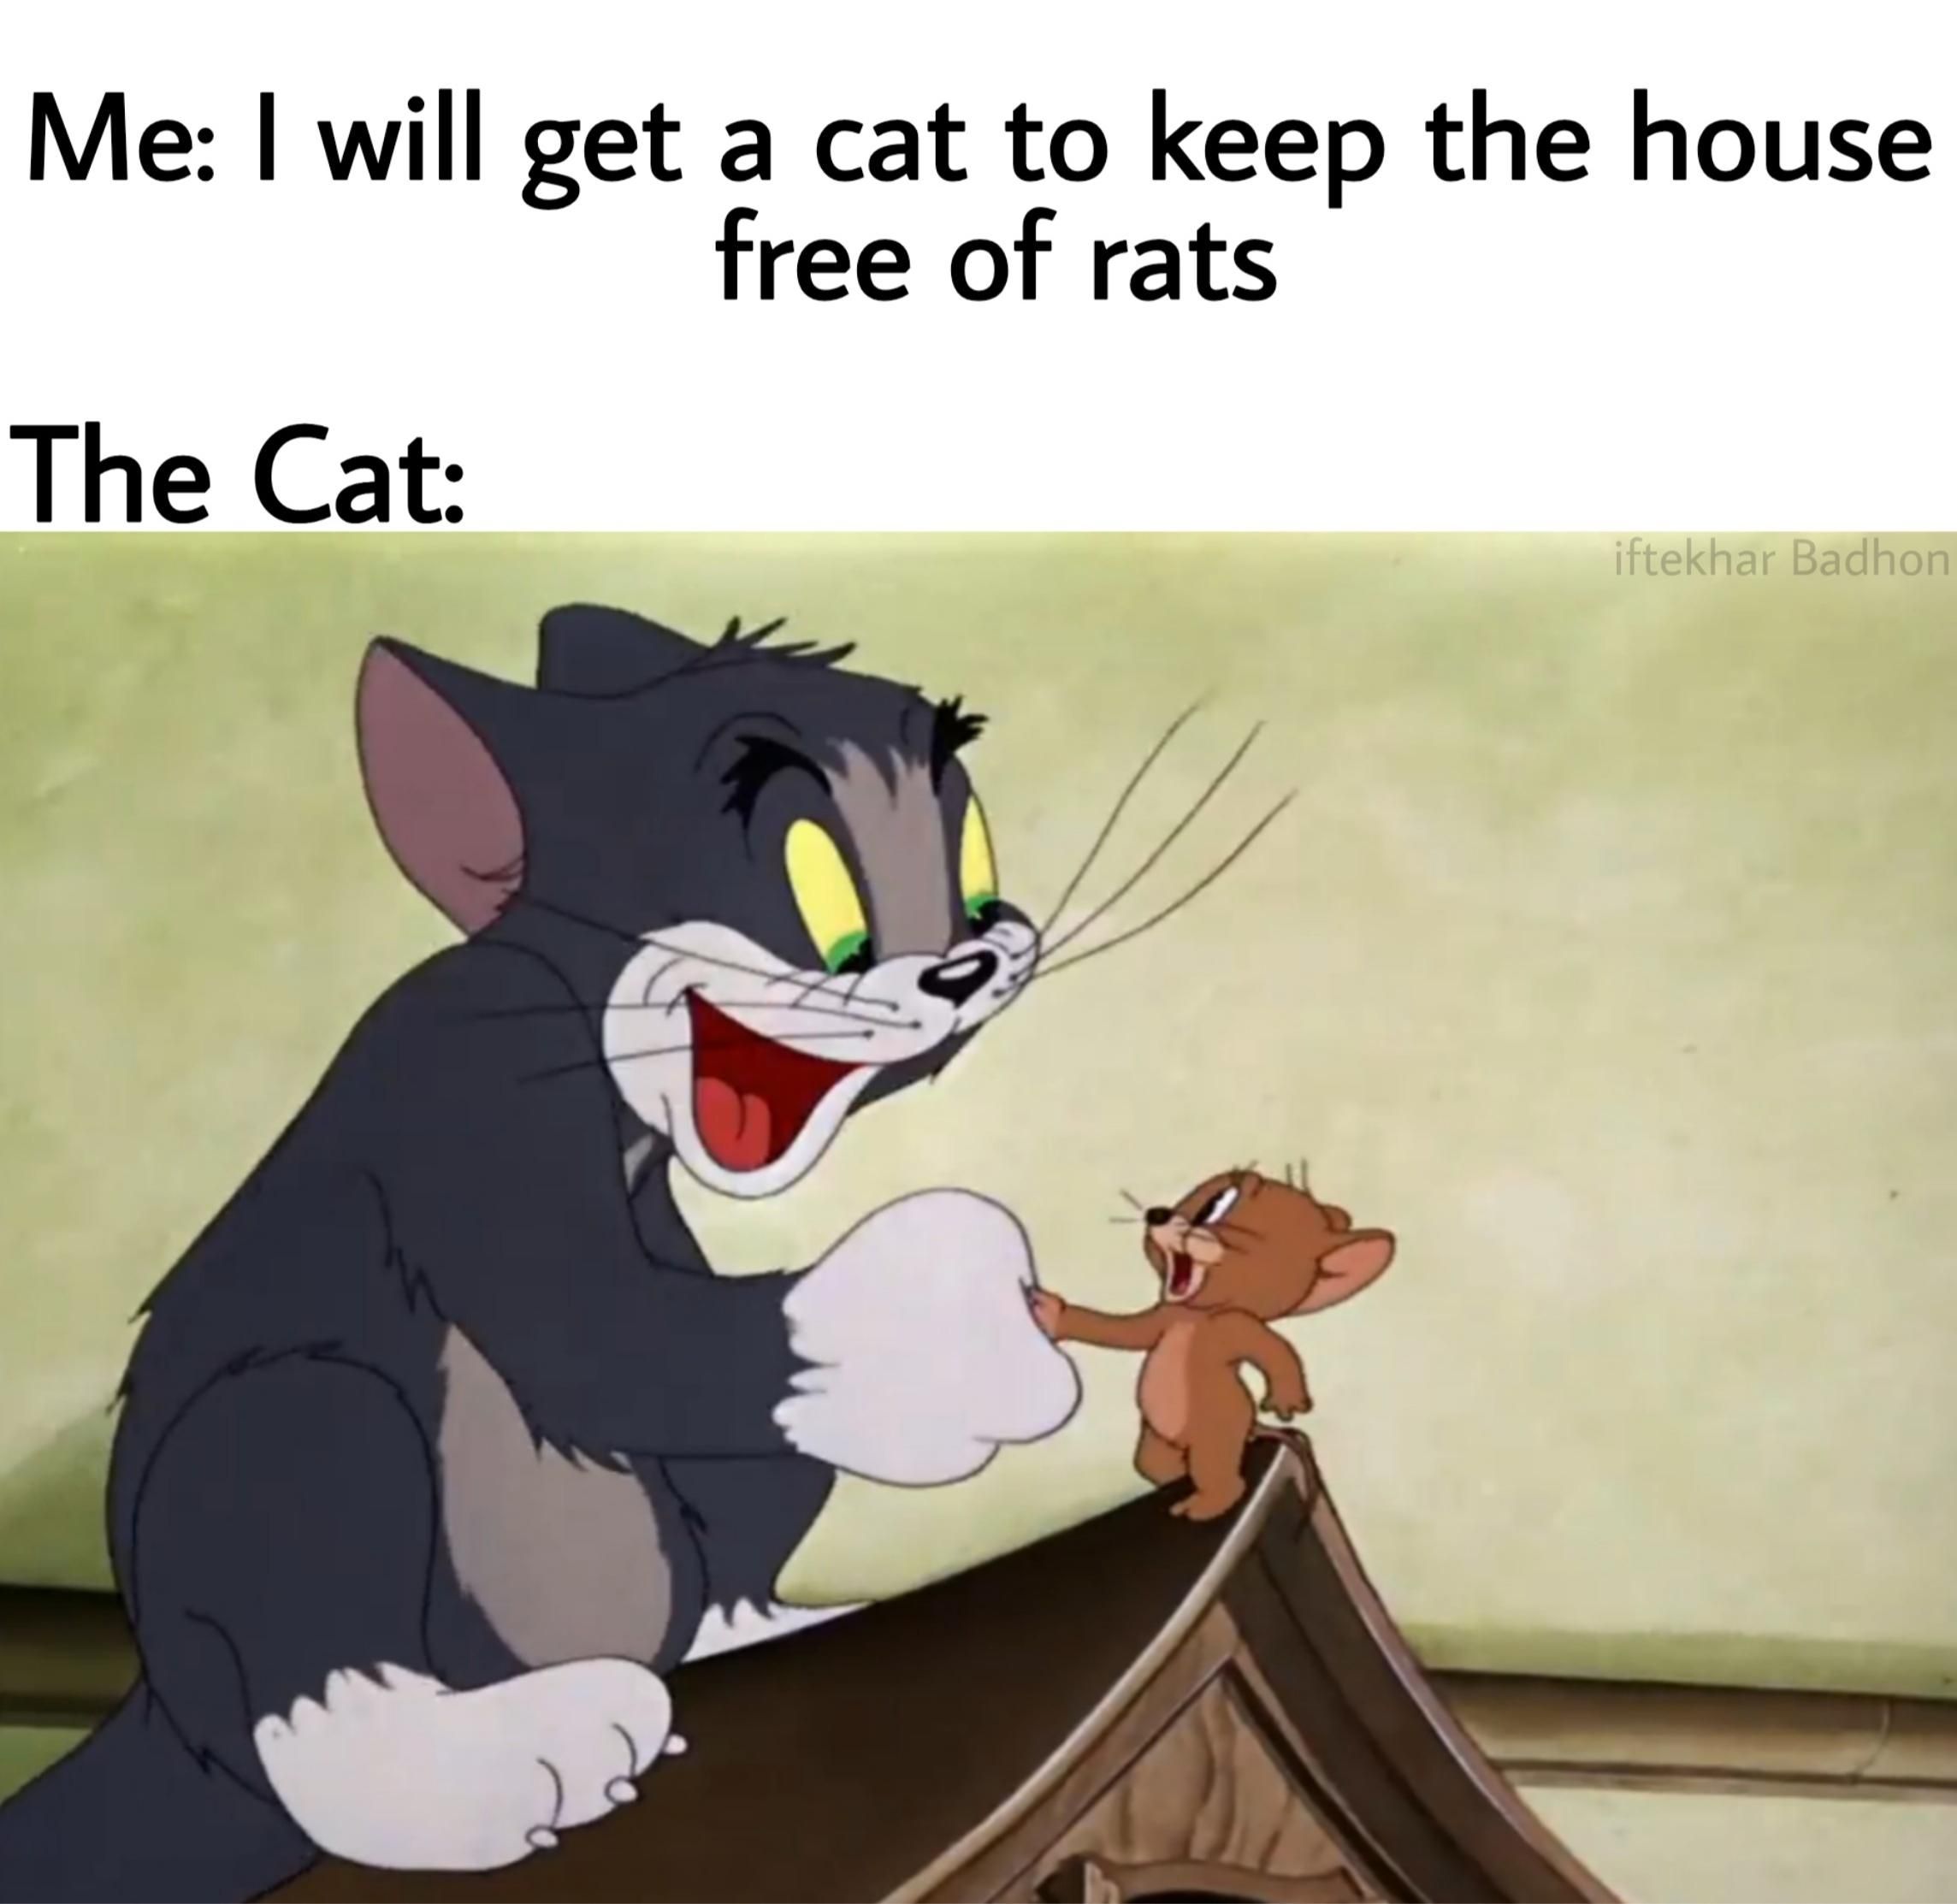 i think it’s wholesome meme for Tom and Jerry lover’s